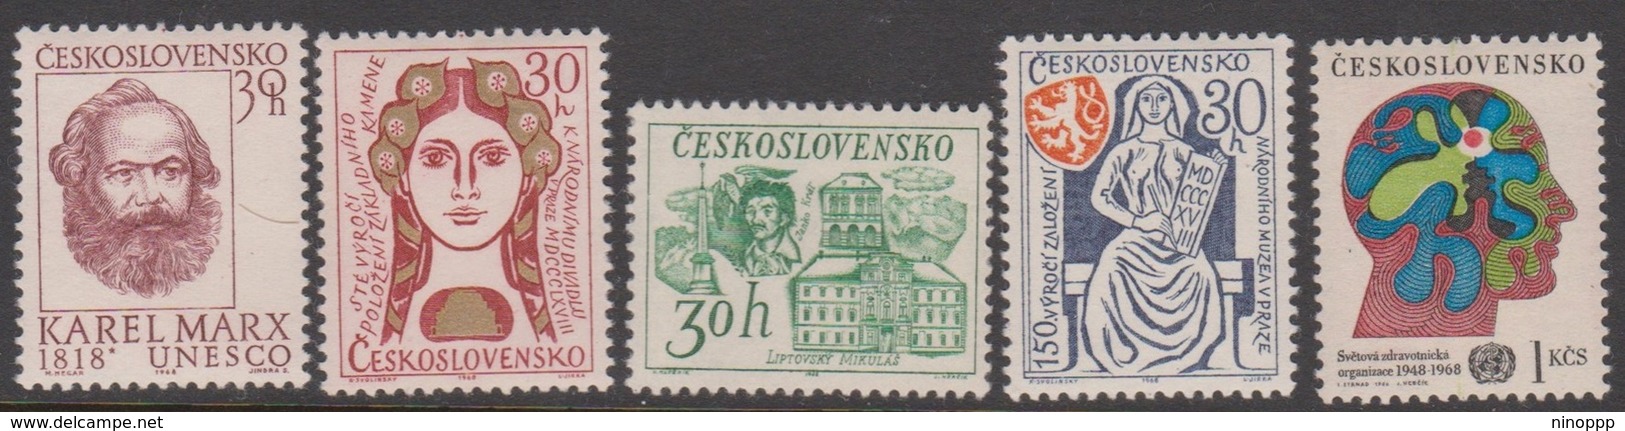 Czechoslovakia SG 1725-1729 1968 Commemoratives, Mint Never Hinged - Unused Stamps